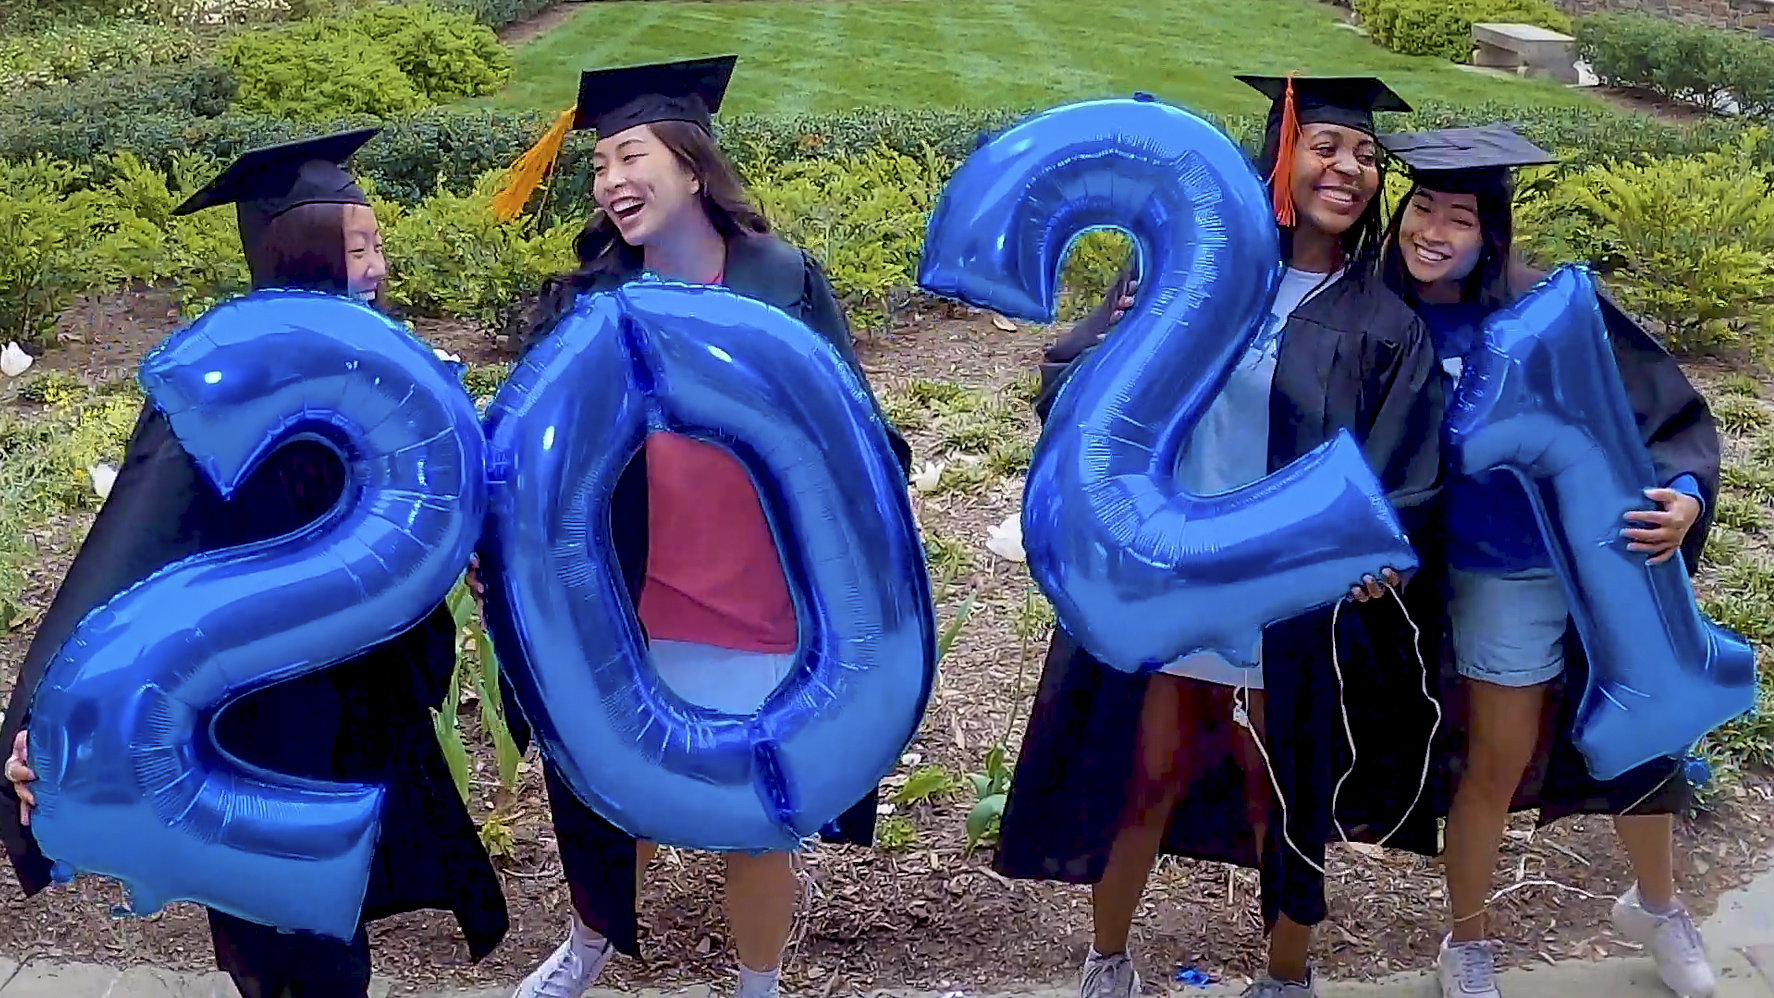 Seniors Lavonne Hoang, Alice Zheng, Genoveva Ntirugelgwa, and Sonia Lau celebrate with 2021 balloons during our filming session.